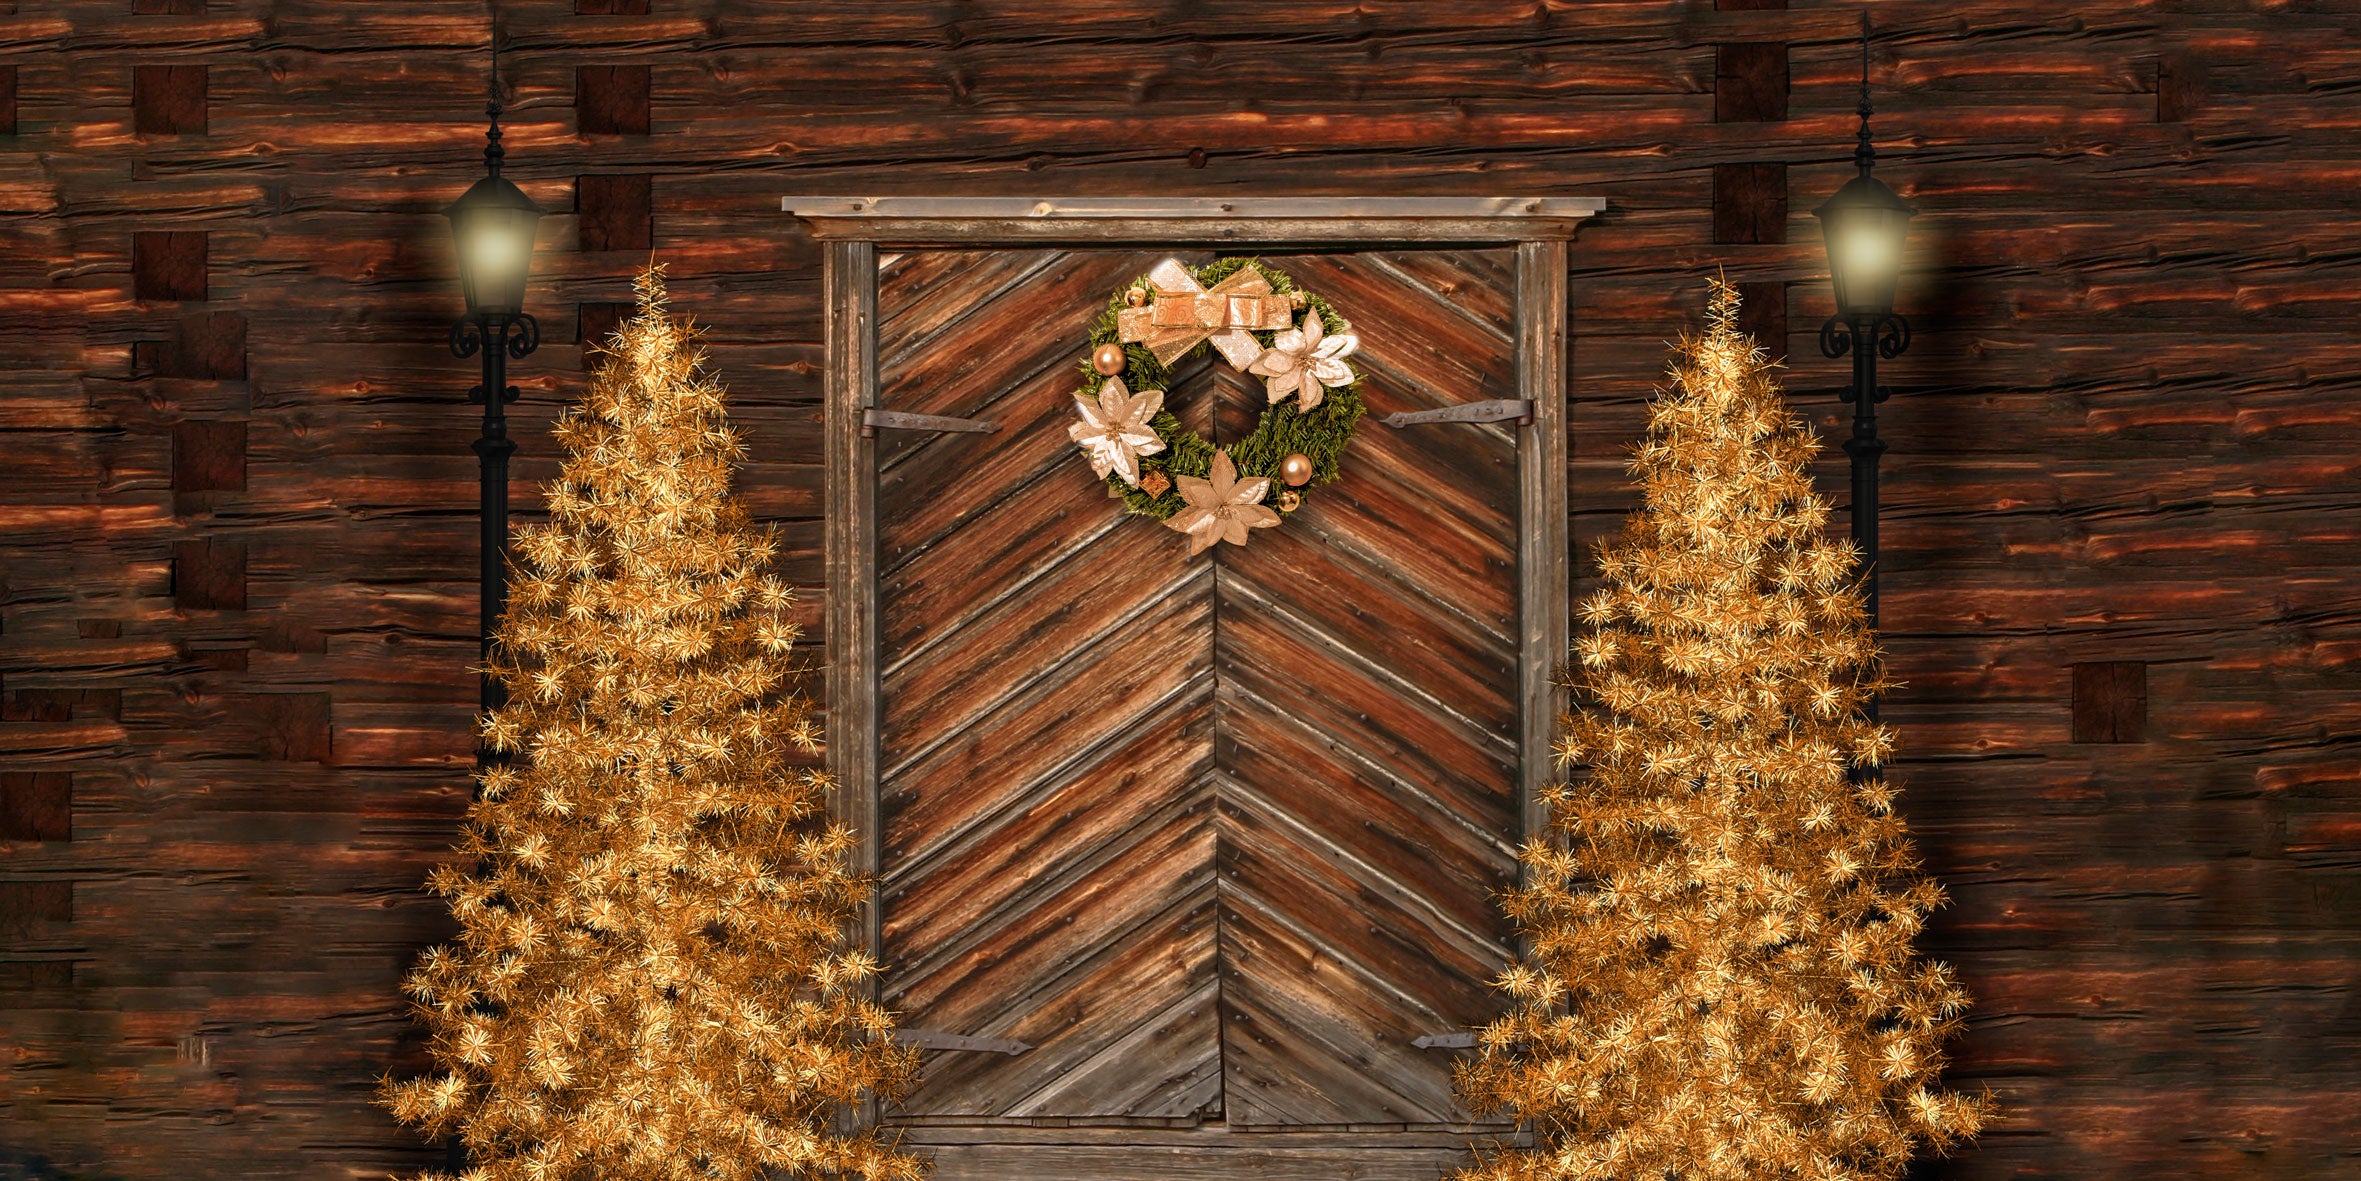 Kate Xmas Backdrop Gold Christmas Trees & Door Designed by Chain Photography